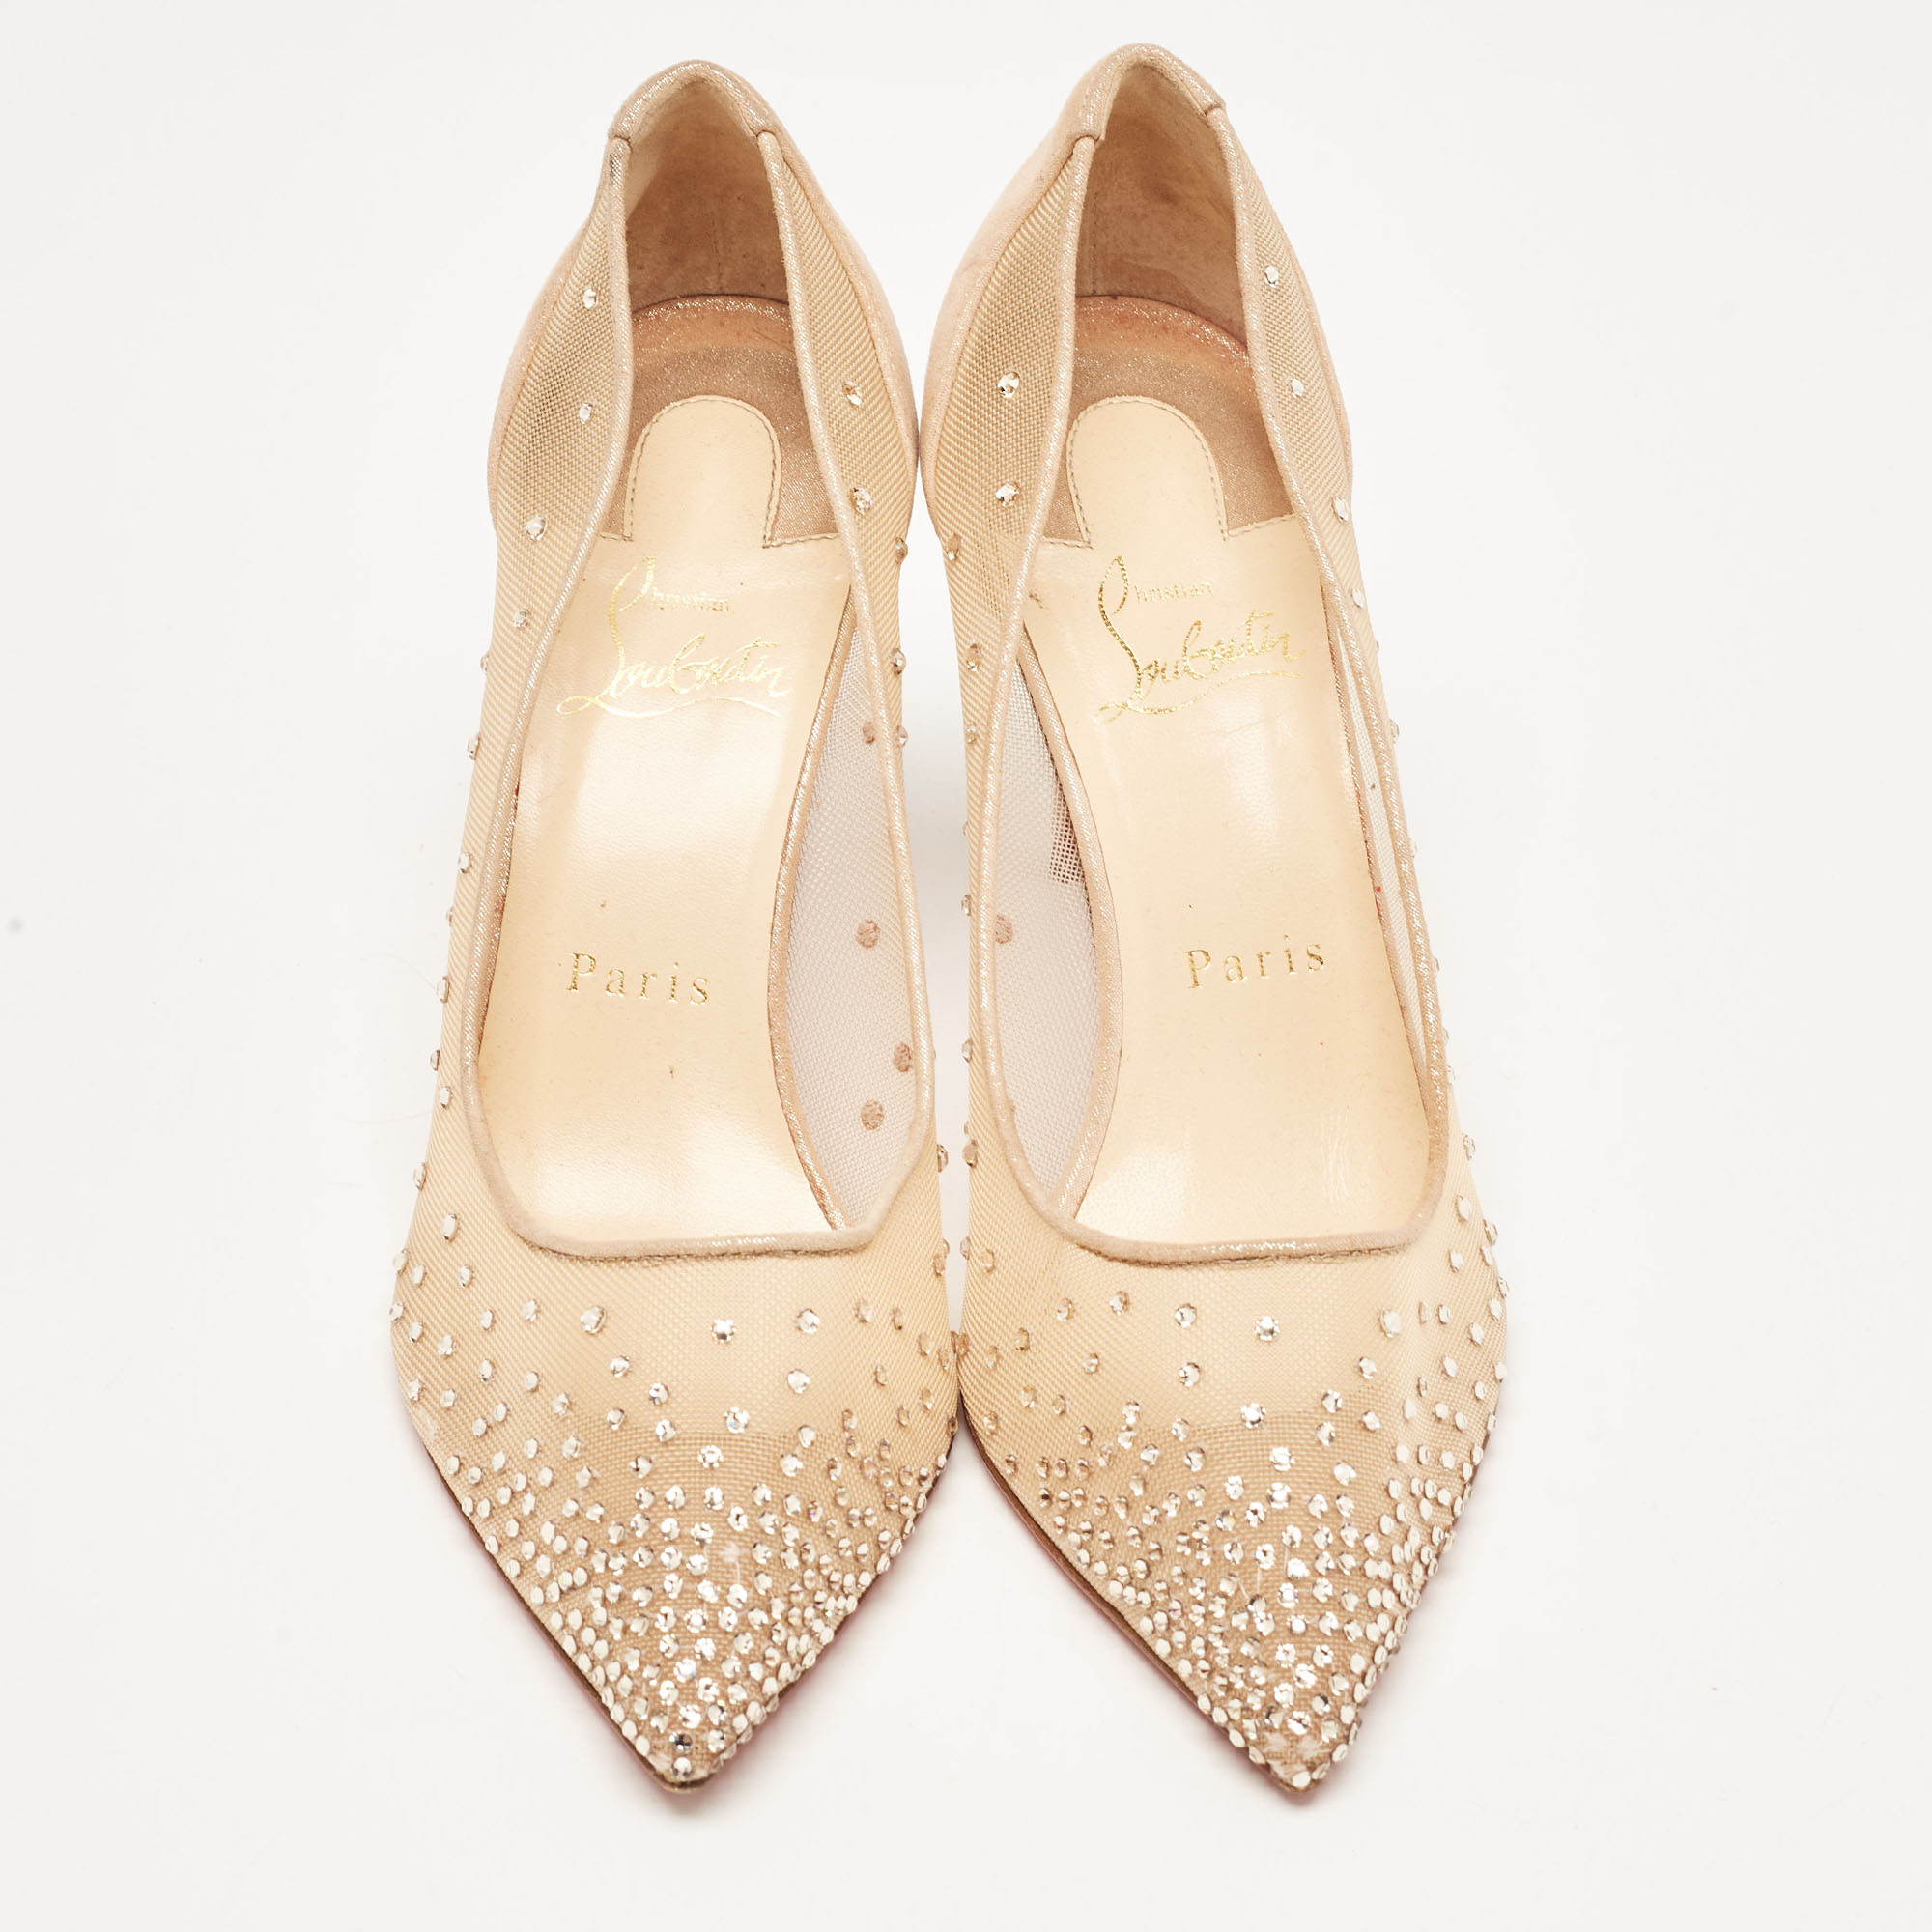 Christian Louboutin Beige Mesh And Laminated Suede Follies Strass Pumps Size 37.5